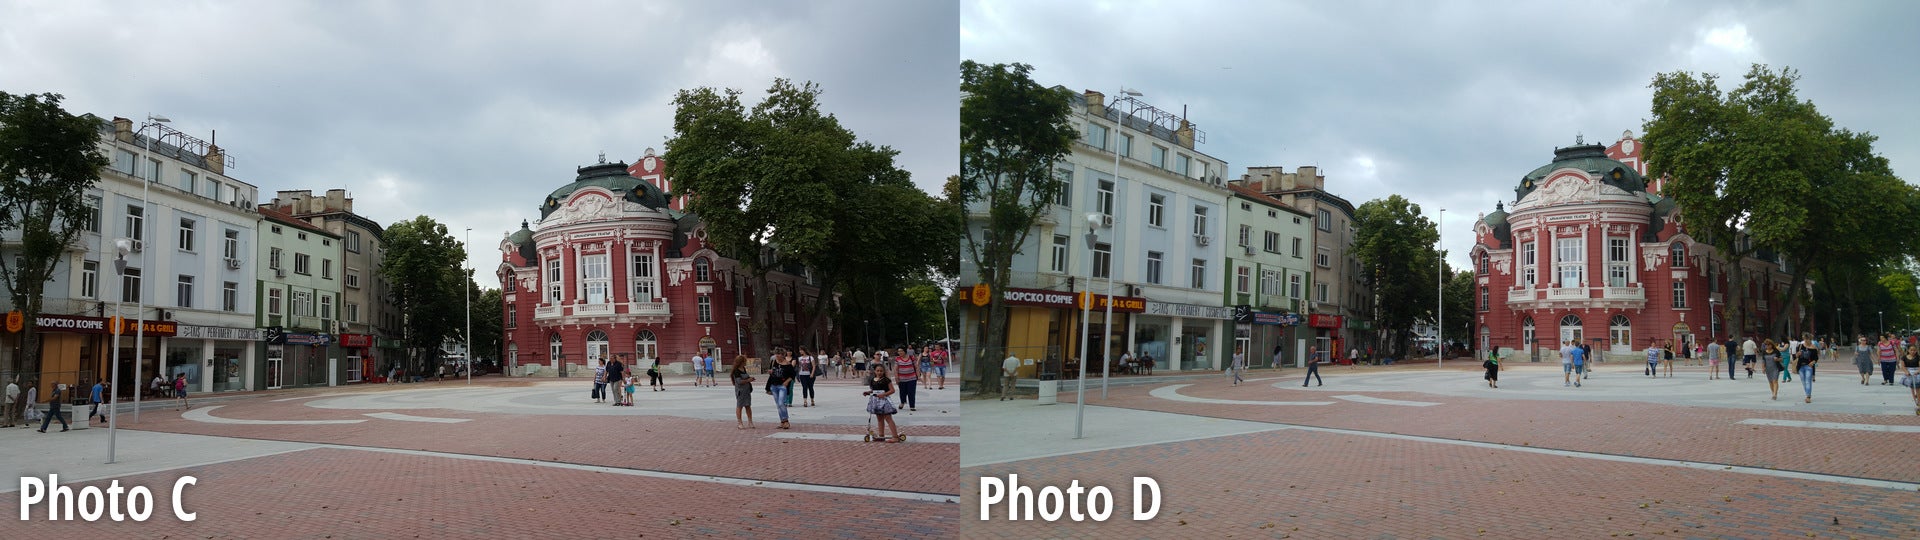 Side-by-side preview - LG G4 vs Samsung Galaxy S6 blind camera comparison: vote for the better phone